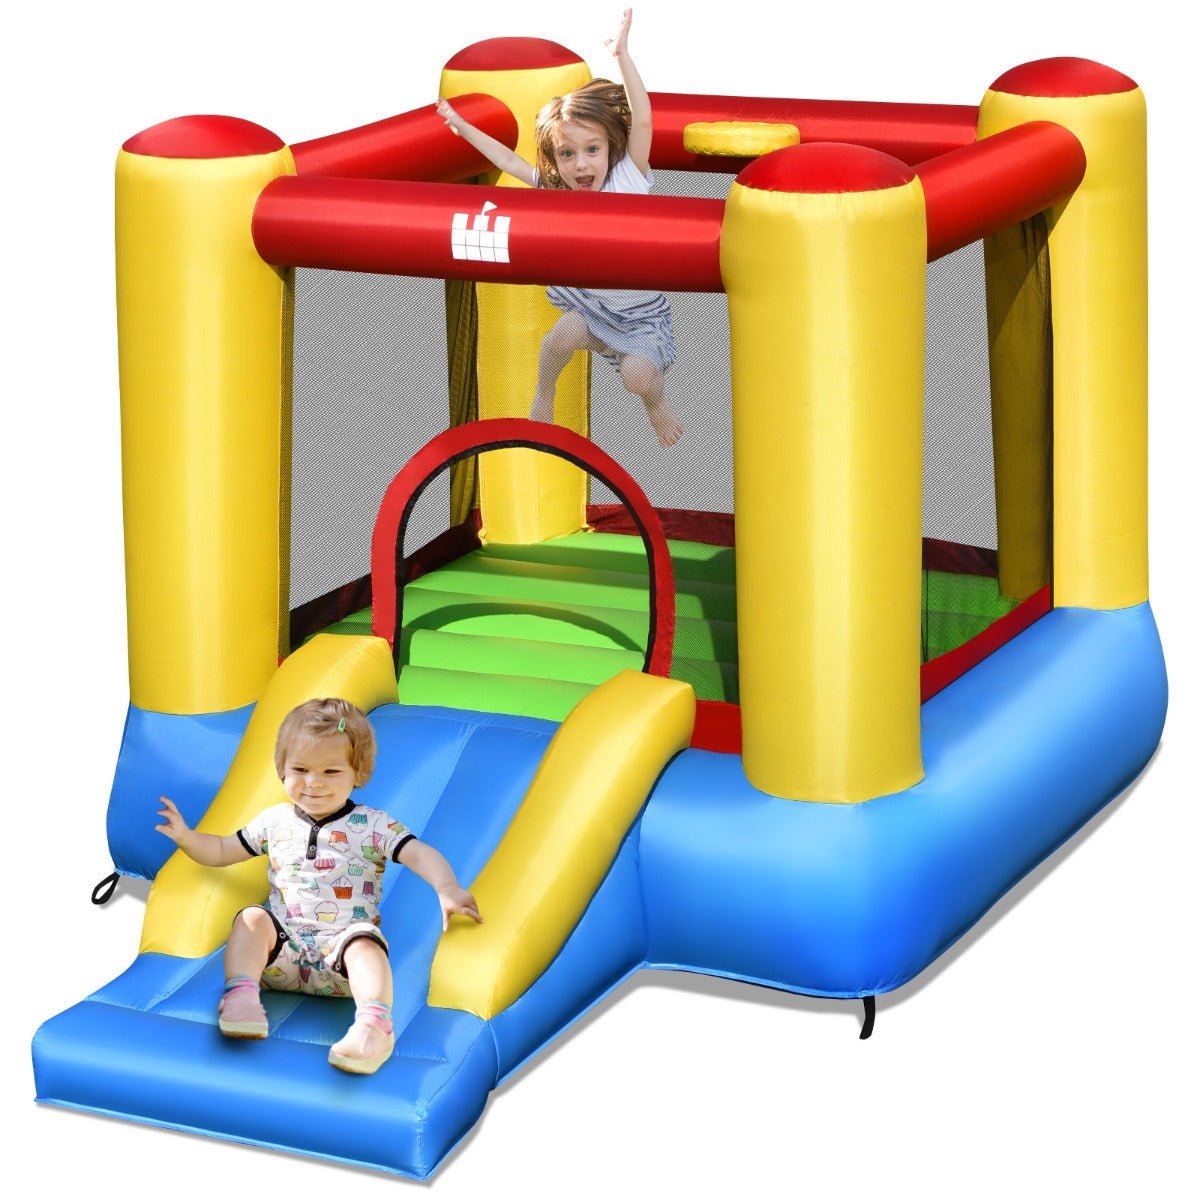 Active Adventures: Inflatable Bounce House with Slide for Kids